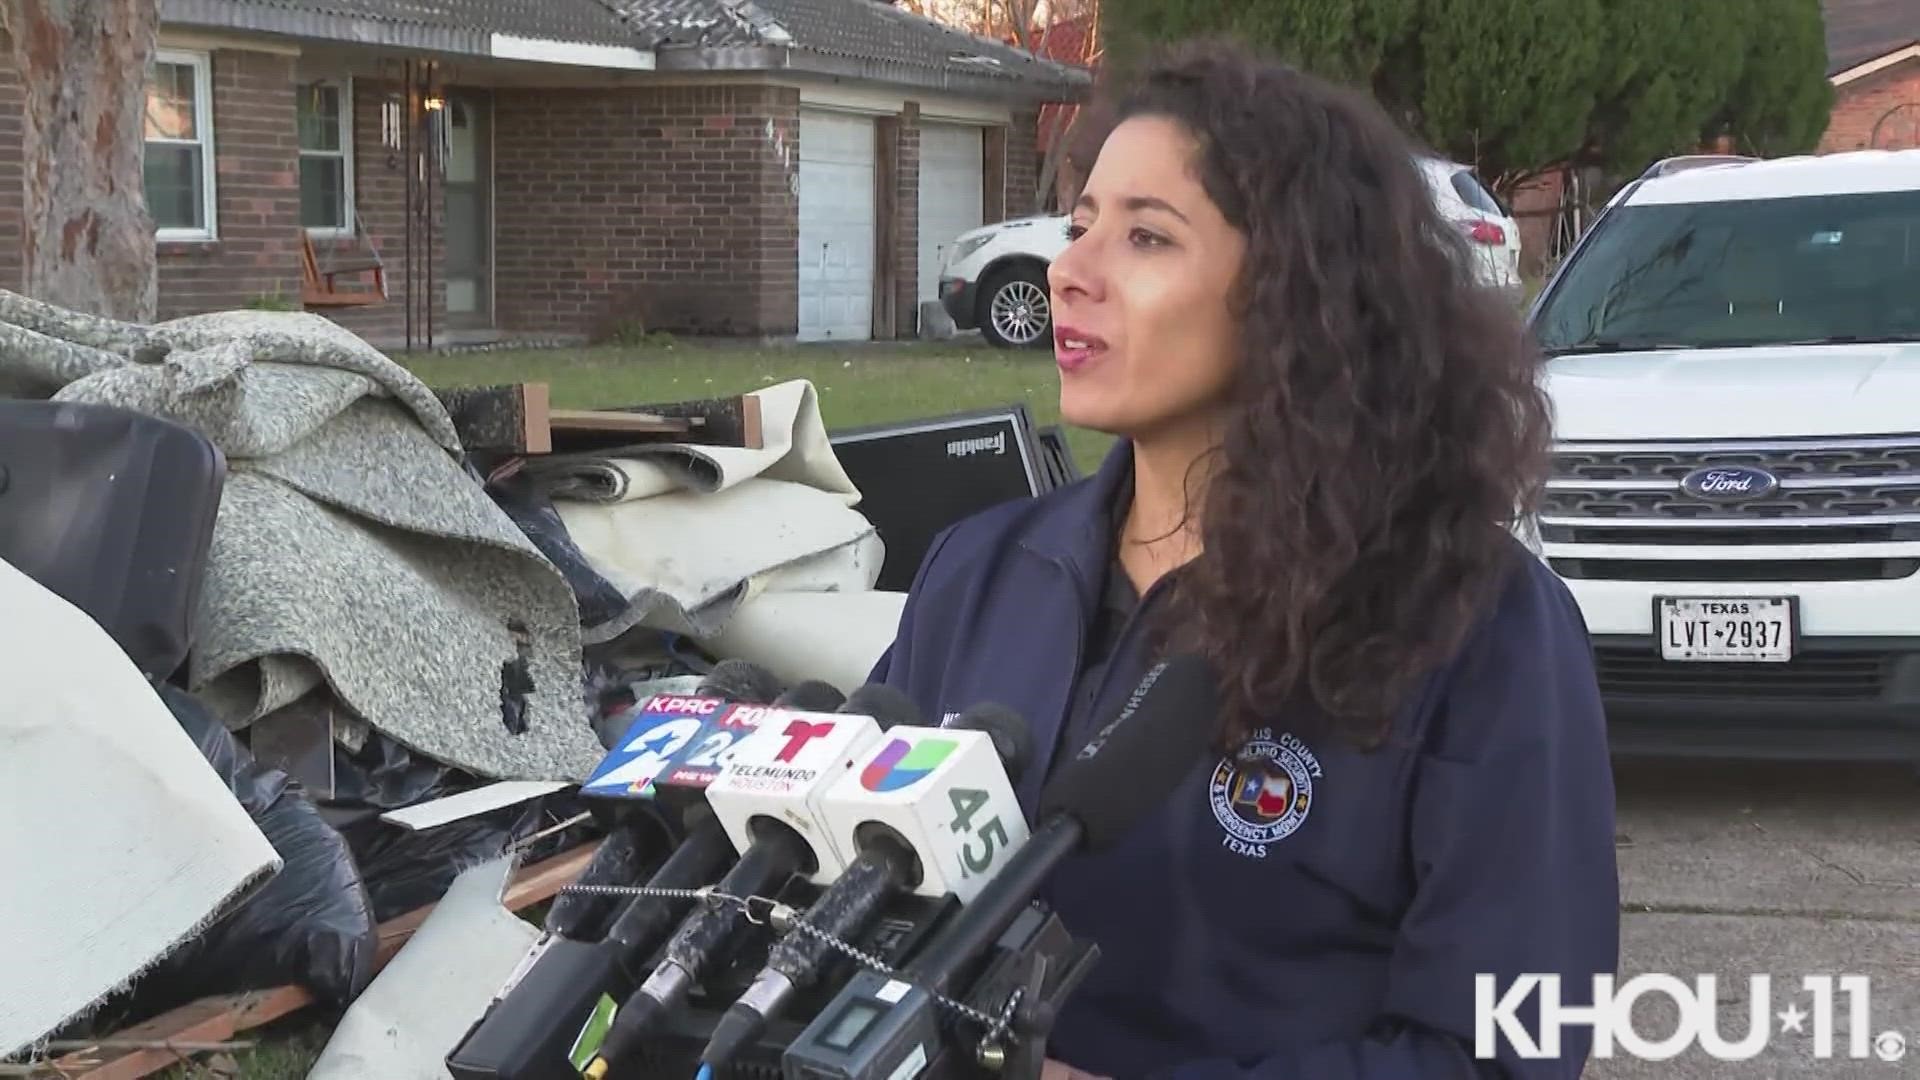 On Wednesday, Judge Lina Hidalgo made her first public comments after severe weather battered Harris County a day prior.